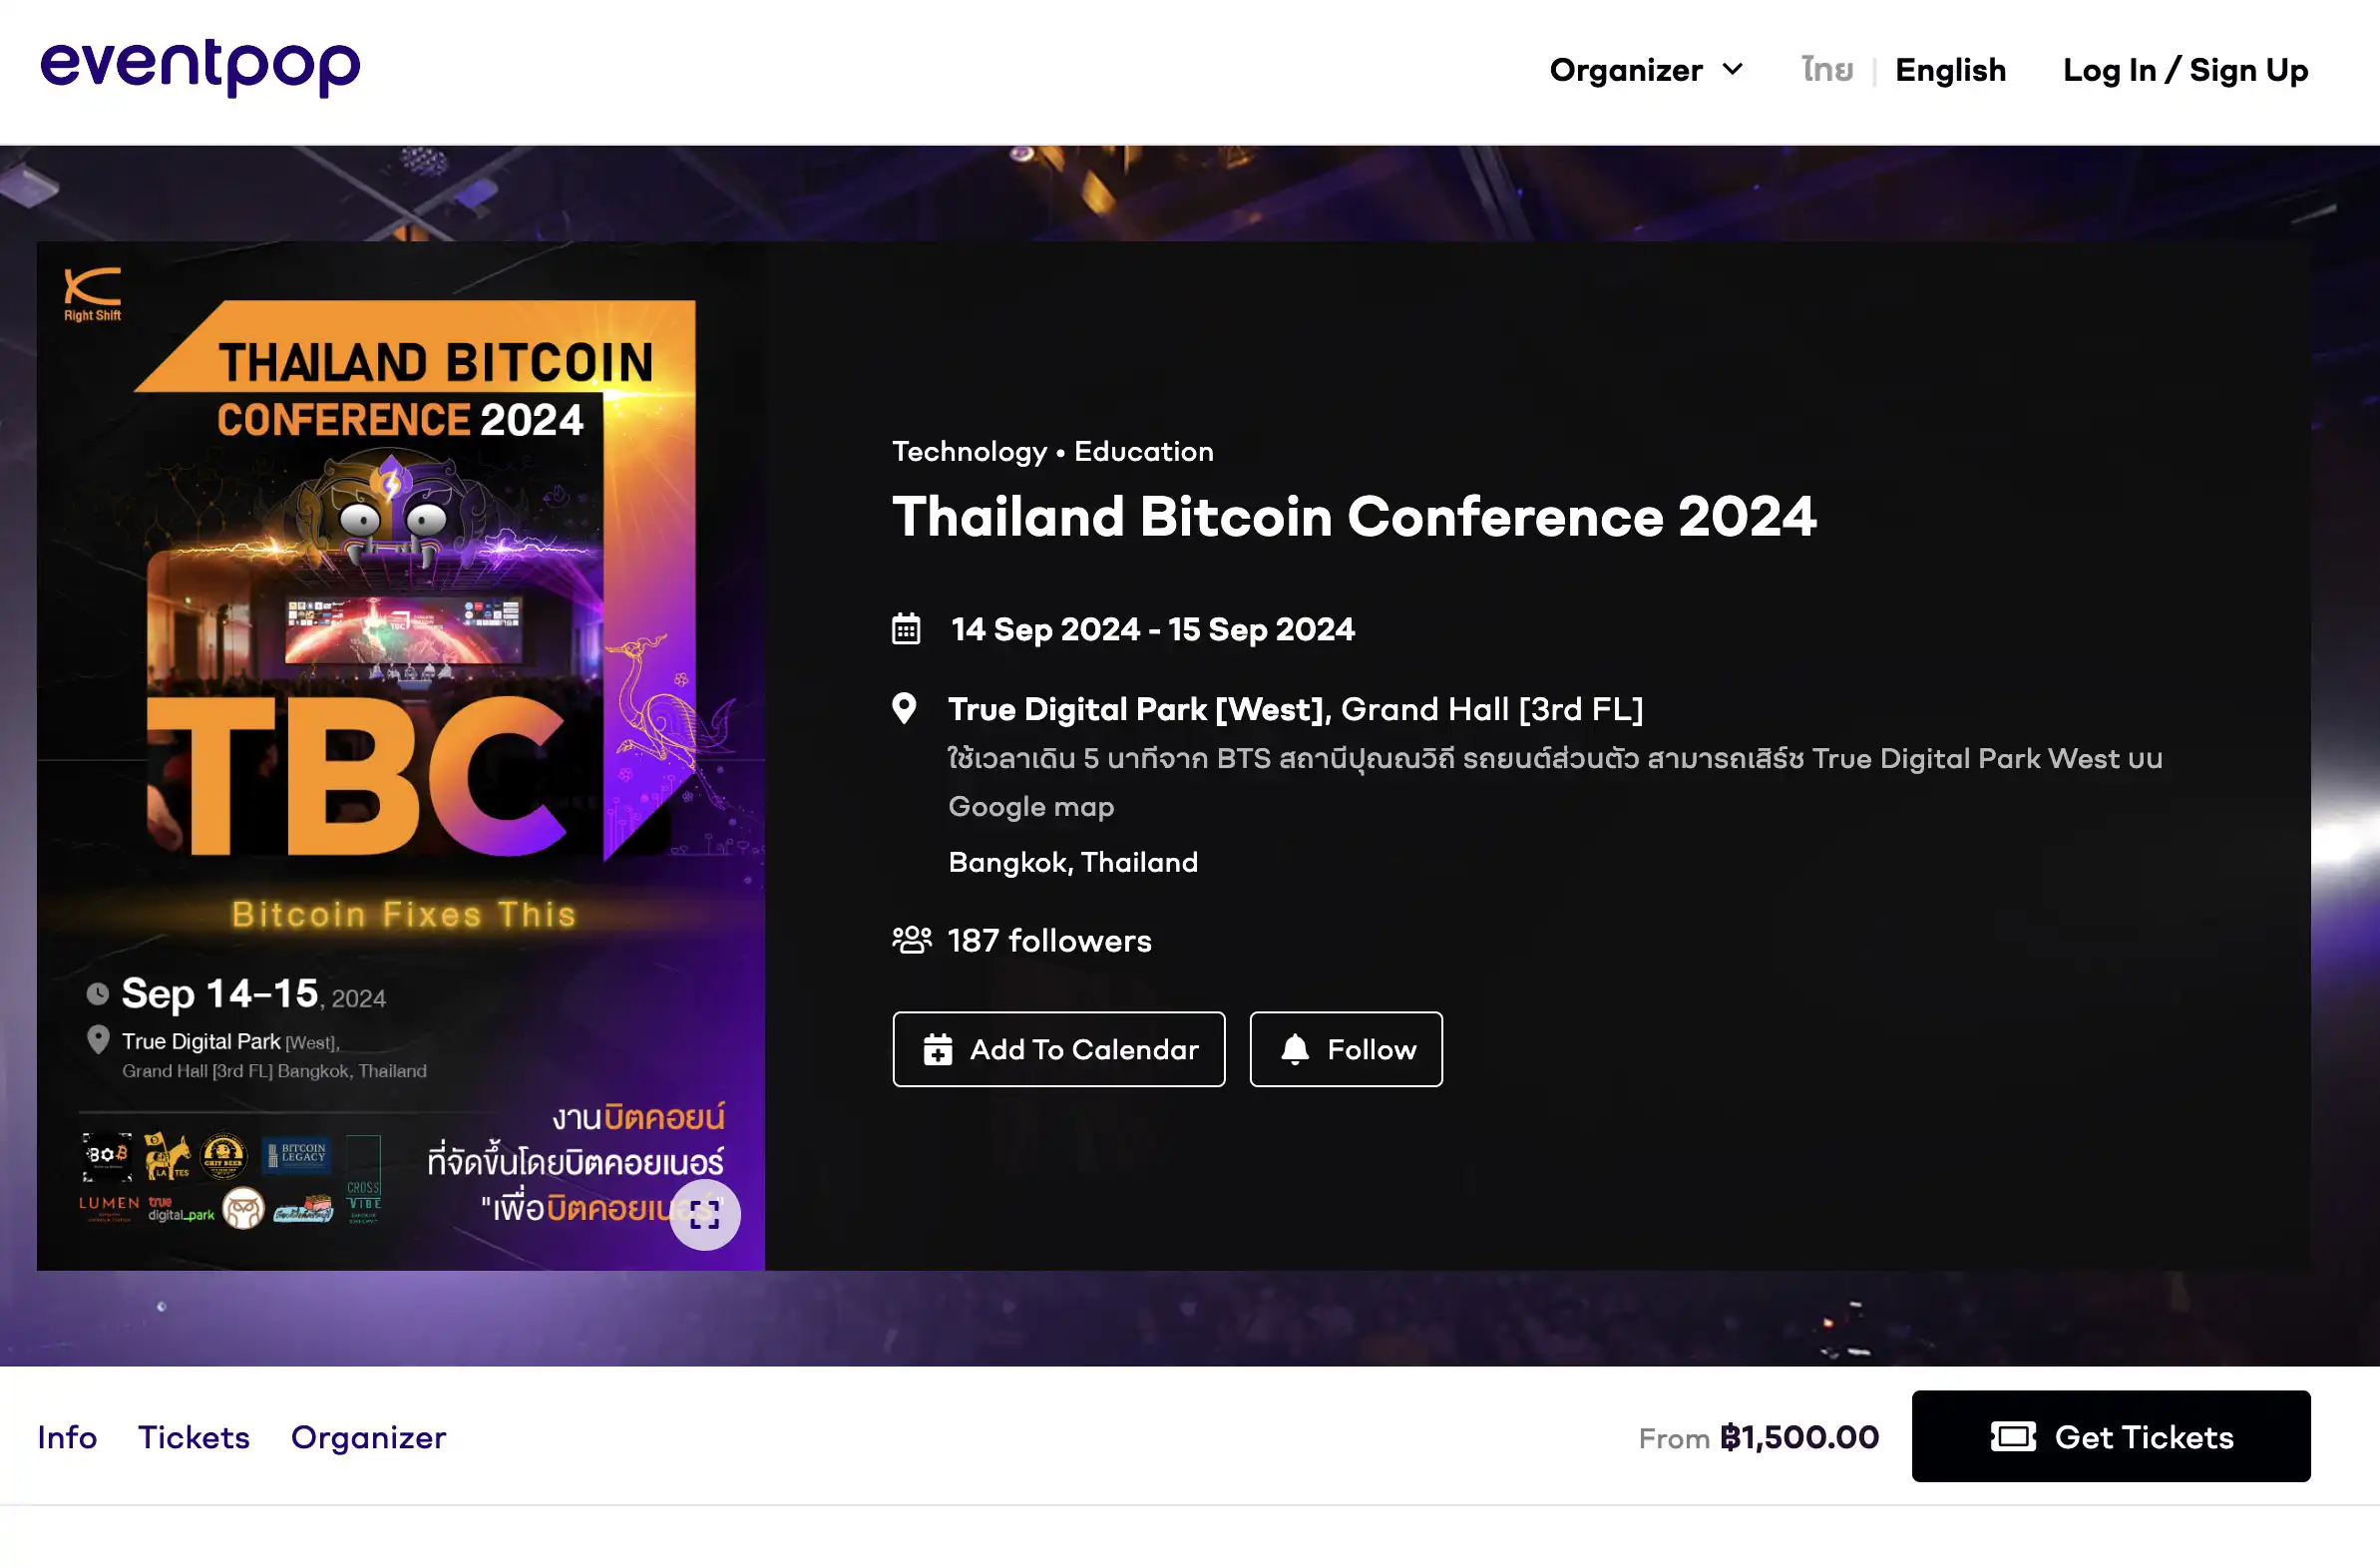 Thailand Bitcoin Conference